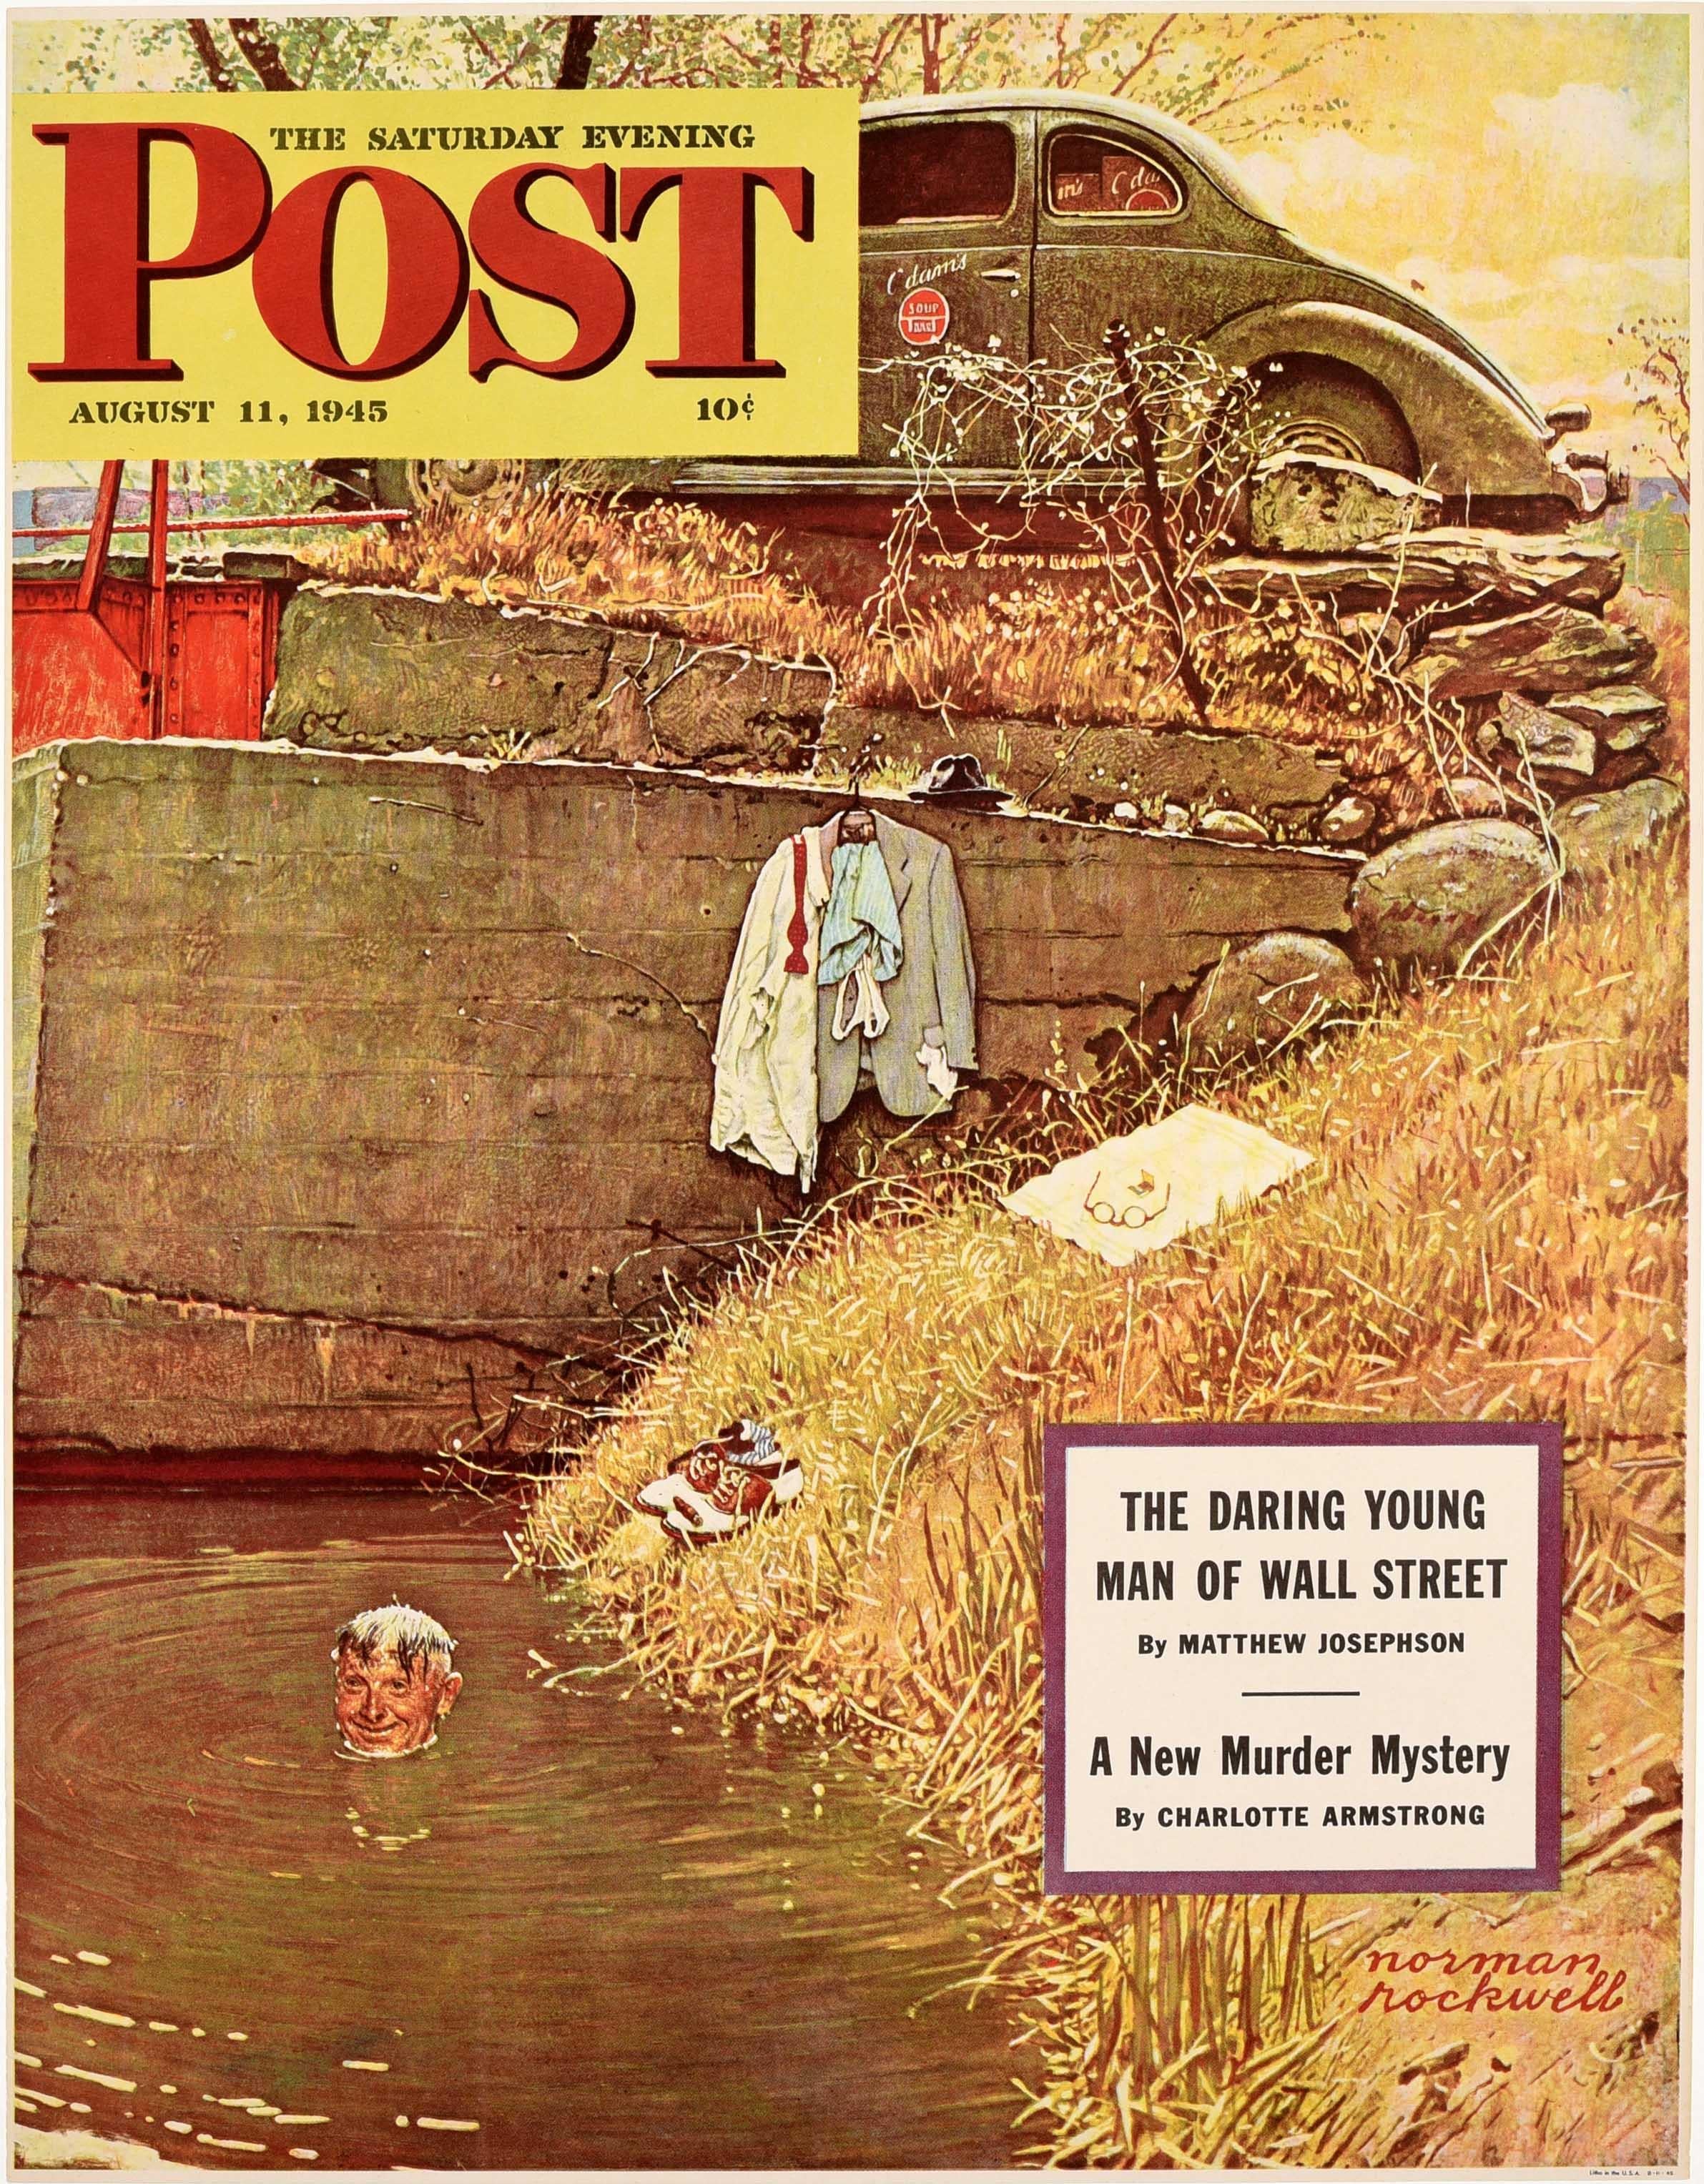 Norman Rockwell Print - Original Vintage Poster For The Saturday Evening Post Swimming Hole Cover Art